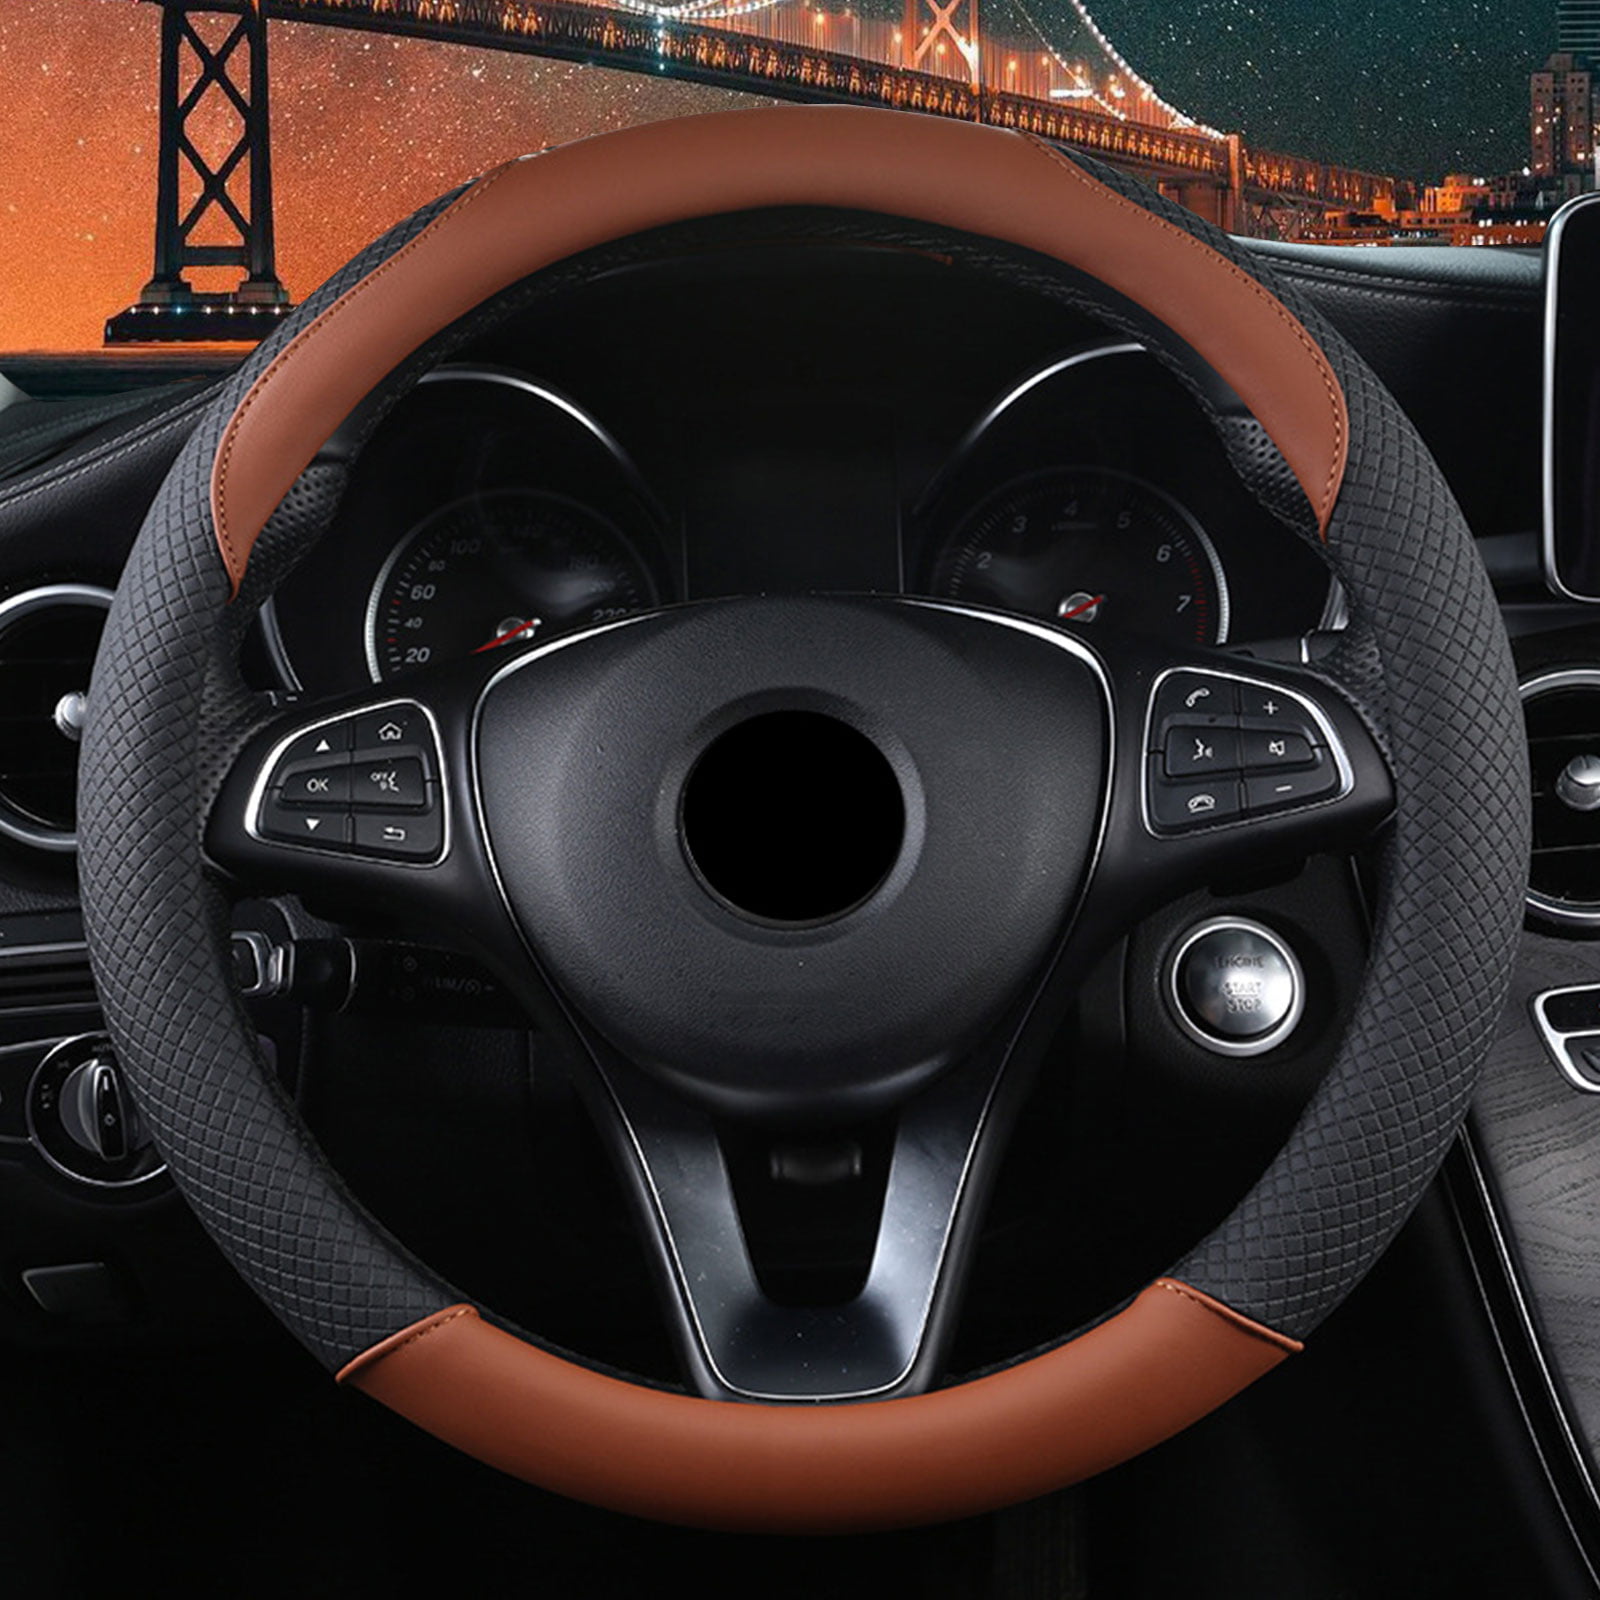 KMMORTOS Car Steering Wheel Cover Universal 15 inch Punching Leather Artificial CA